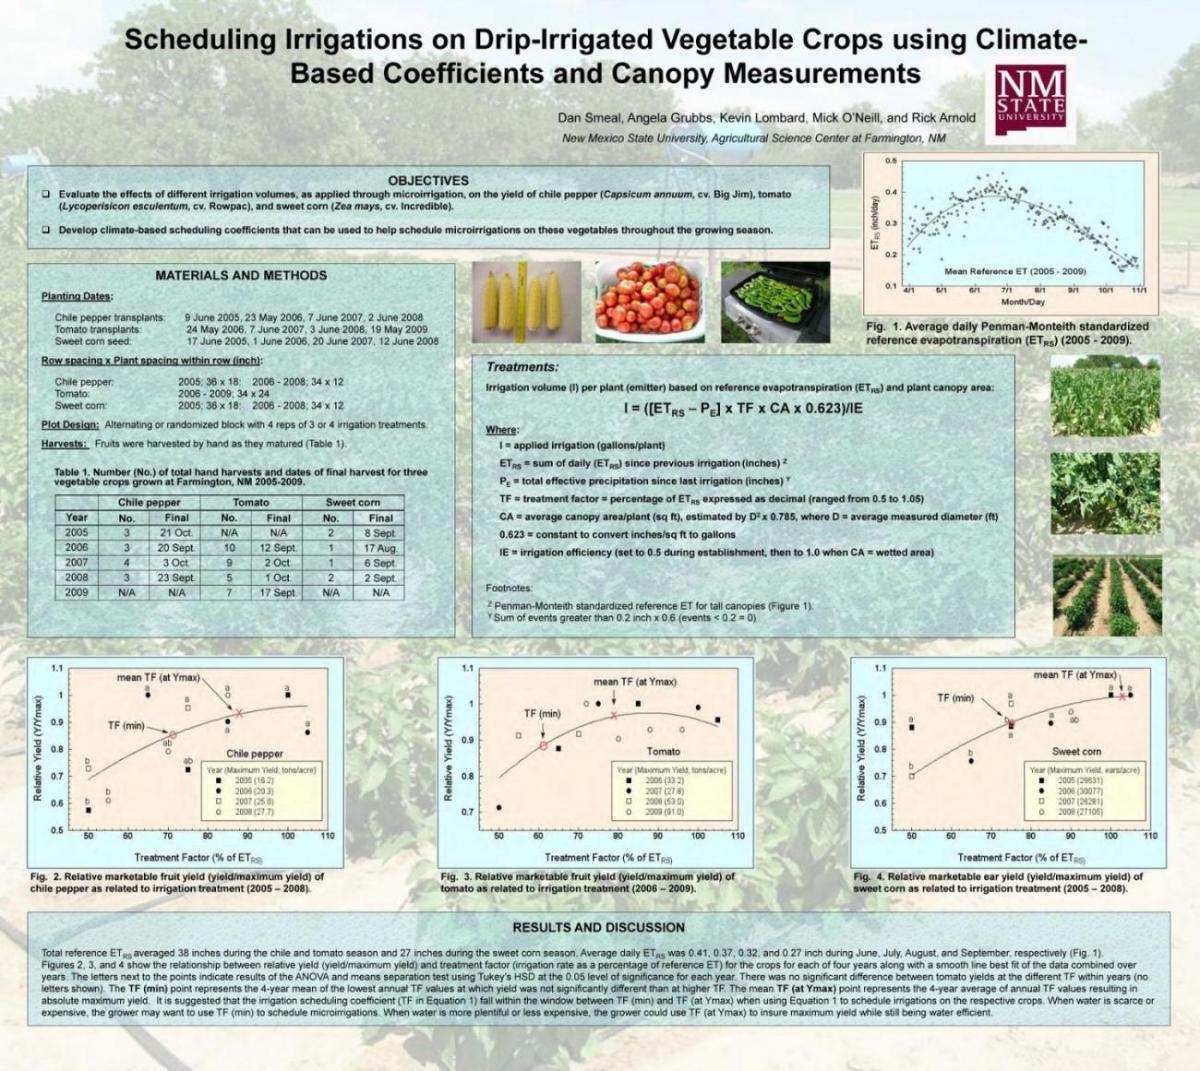 Poster Data Scheduling Irrigations on Drip Irrigation Vegetable Crops using Climate-based Coefficients and Canopy Measurements